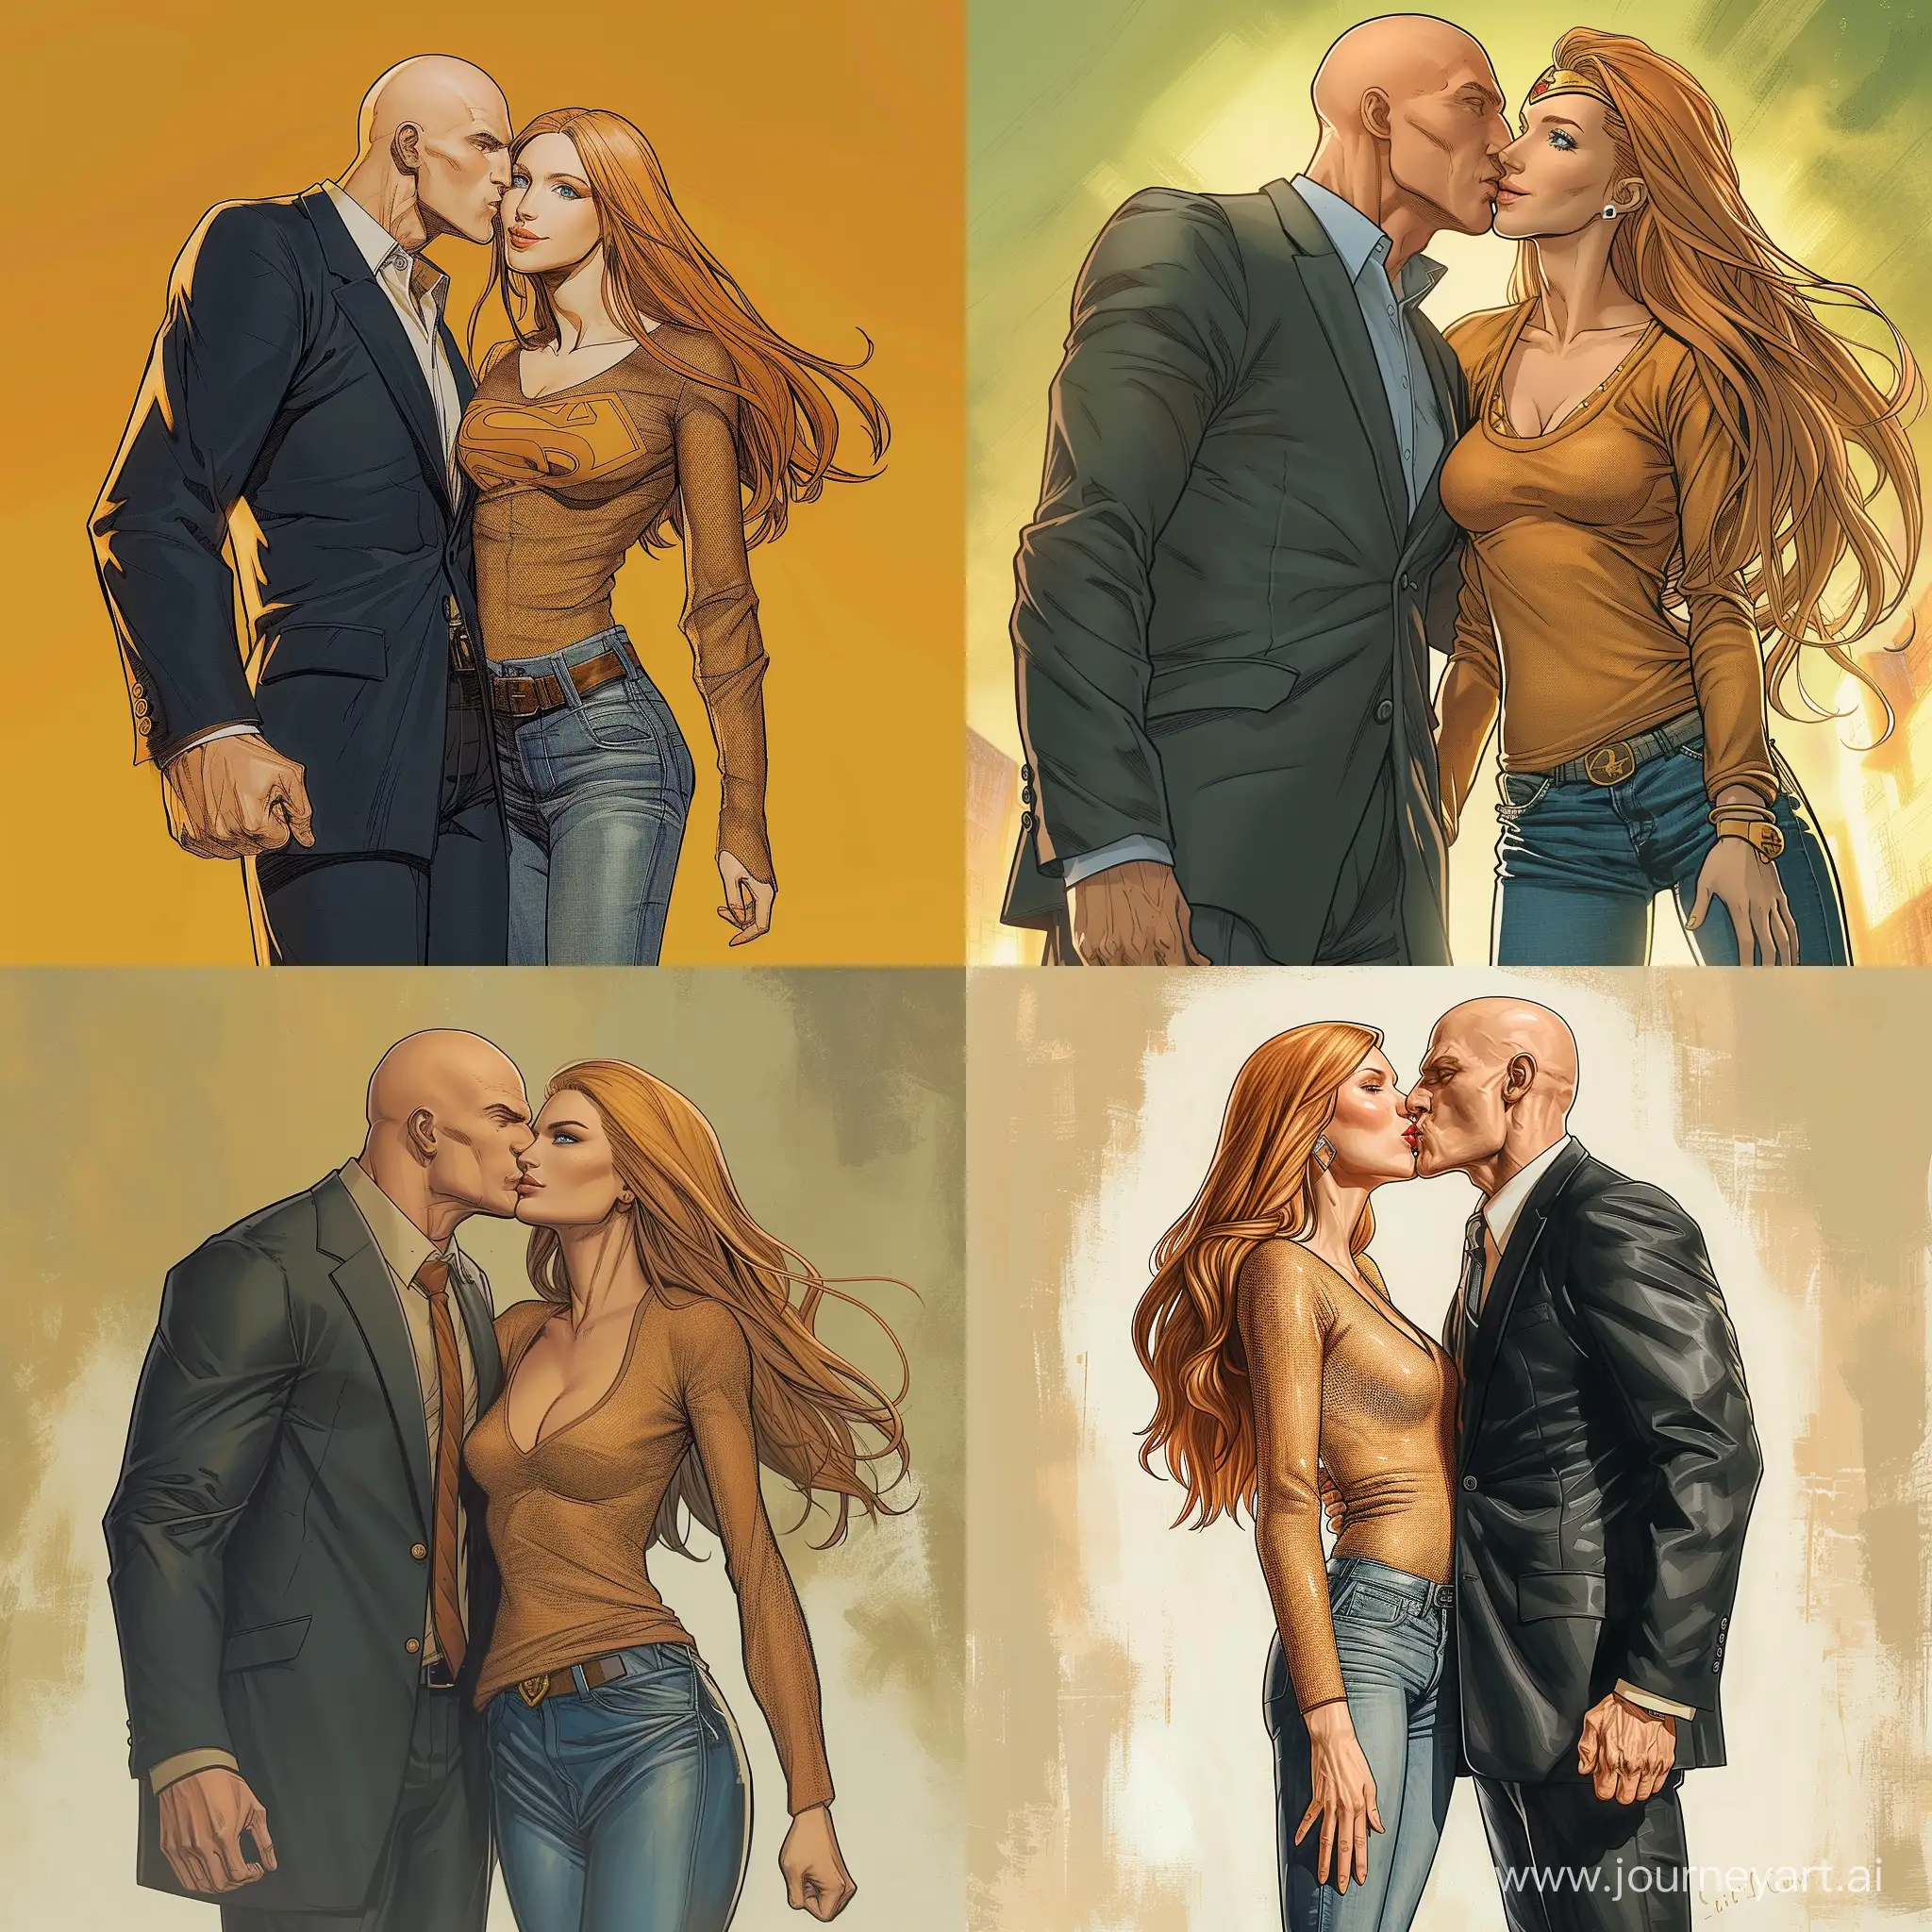 Lex-Luthor-Tall-in-Business-Suit-Kissing-Blonde-Woman-in-Stylish-Attire